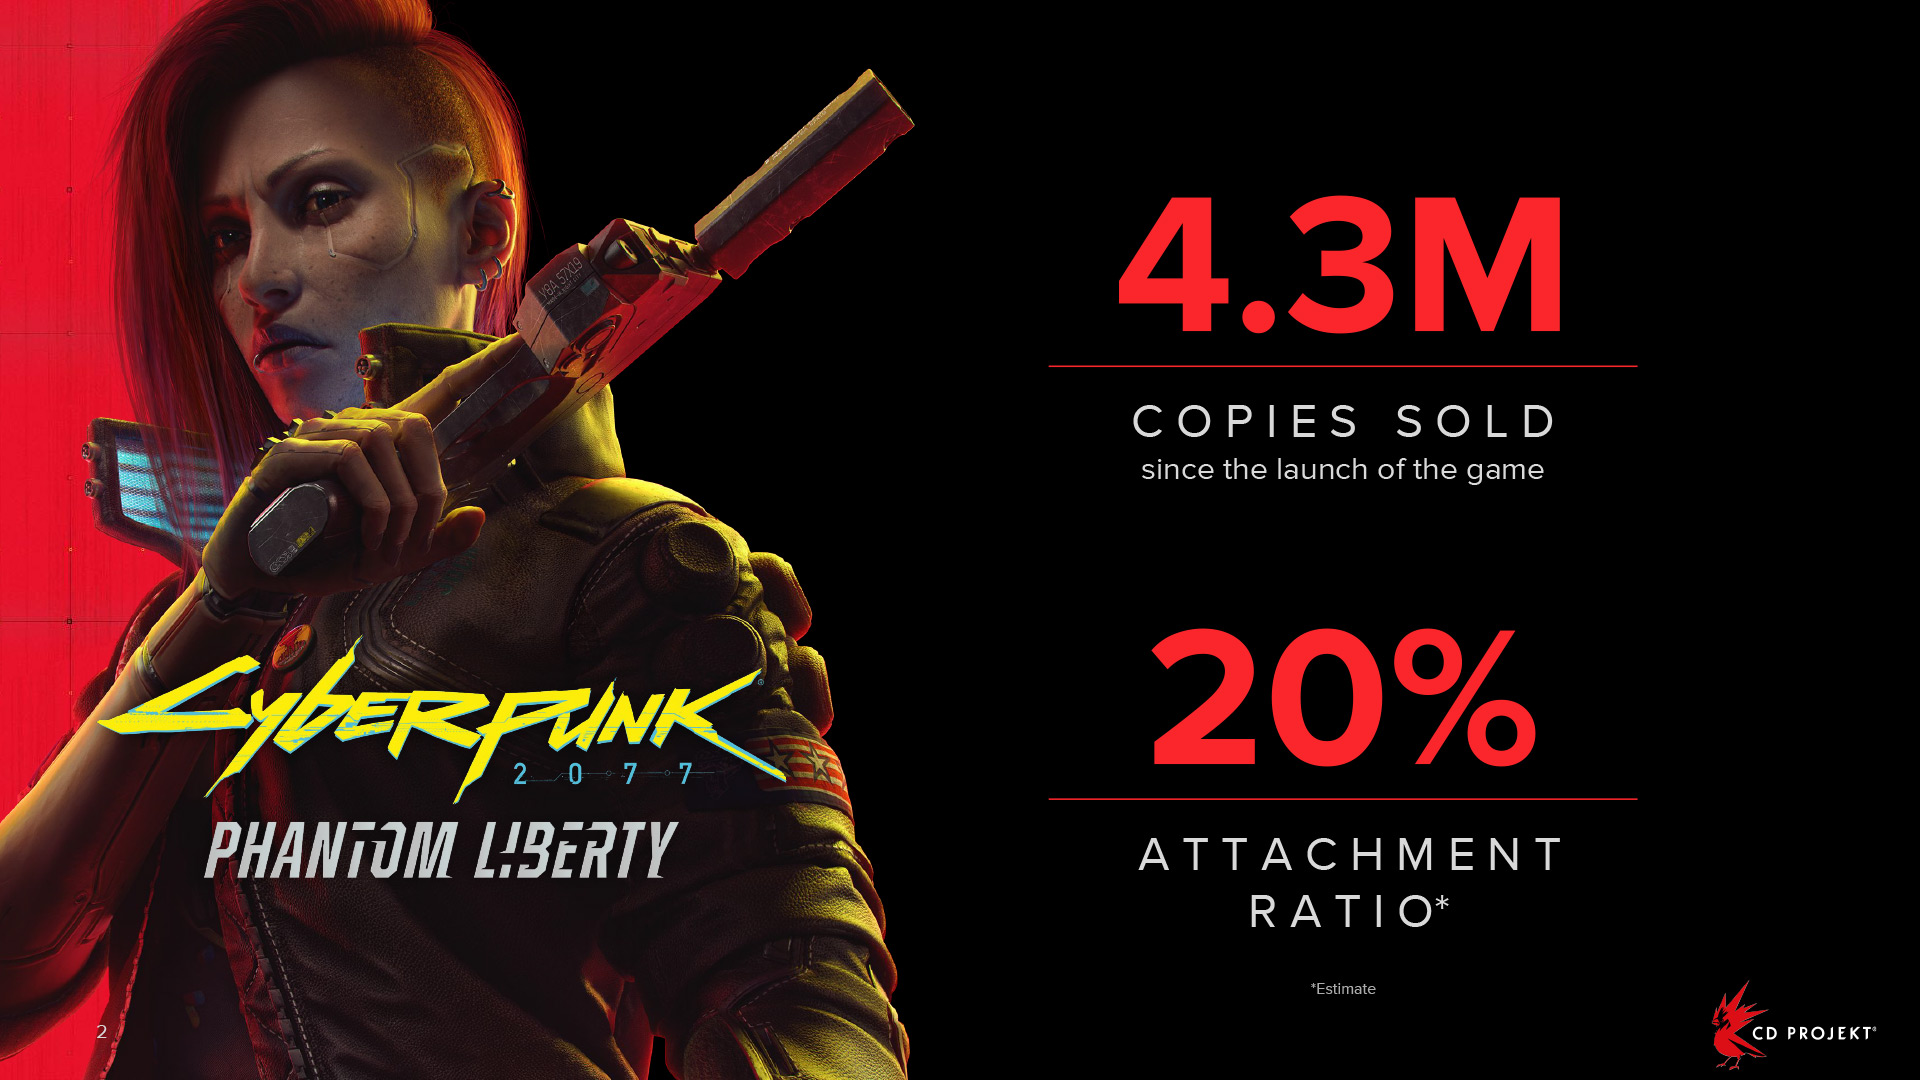 CD Projekt Red has confirmed the Phantom Liberty expansion has sold 4.3 million copies